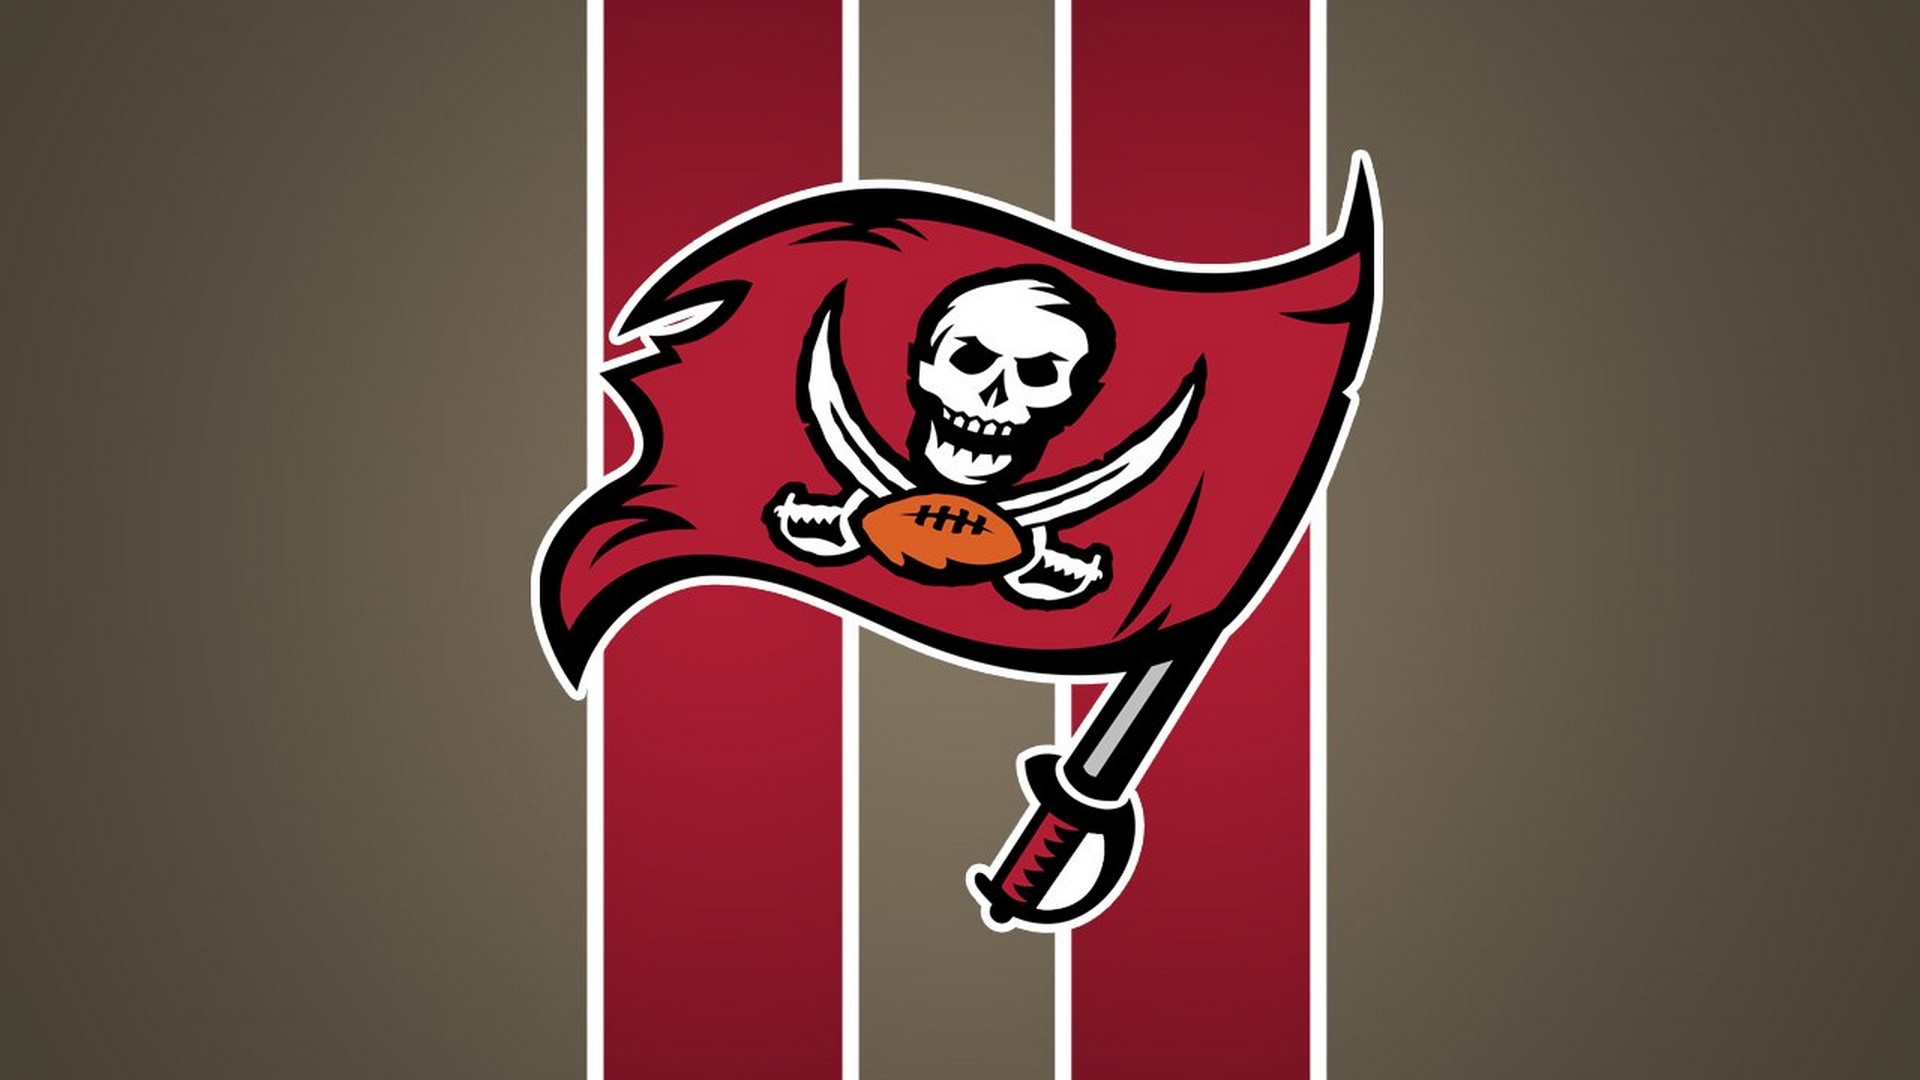 Tampa Bay Buccaneers Desktop Wallpaper With high-resolution 1920X1080 pixel. You can use this wallpaper for your Mac or Windows Desktop Background, iPhone, Android or Tablet and another Smartphone device